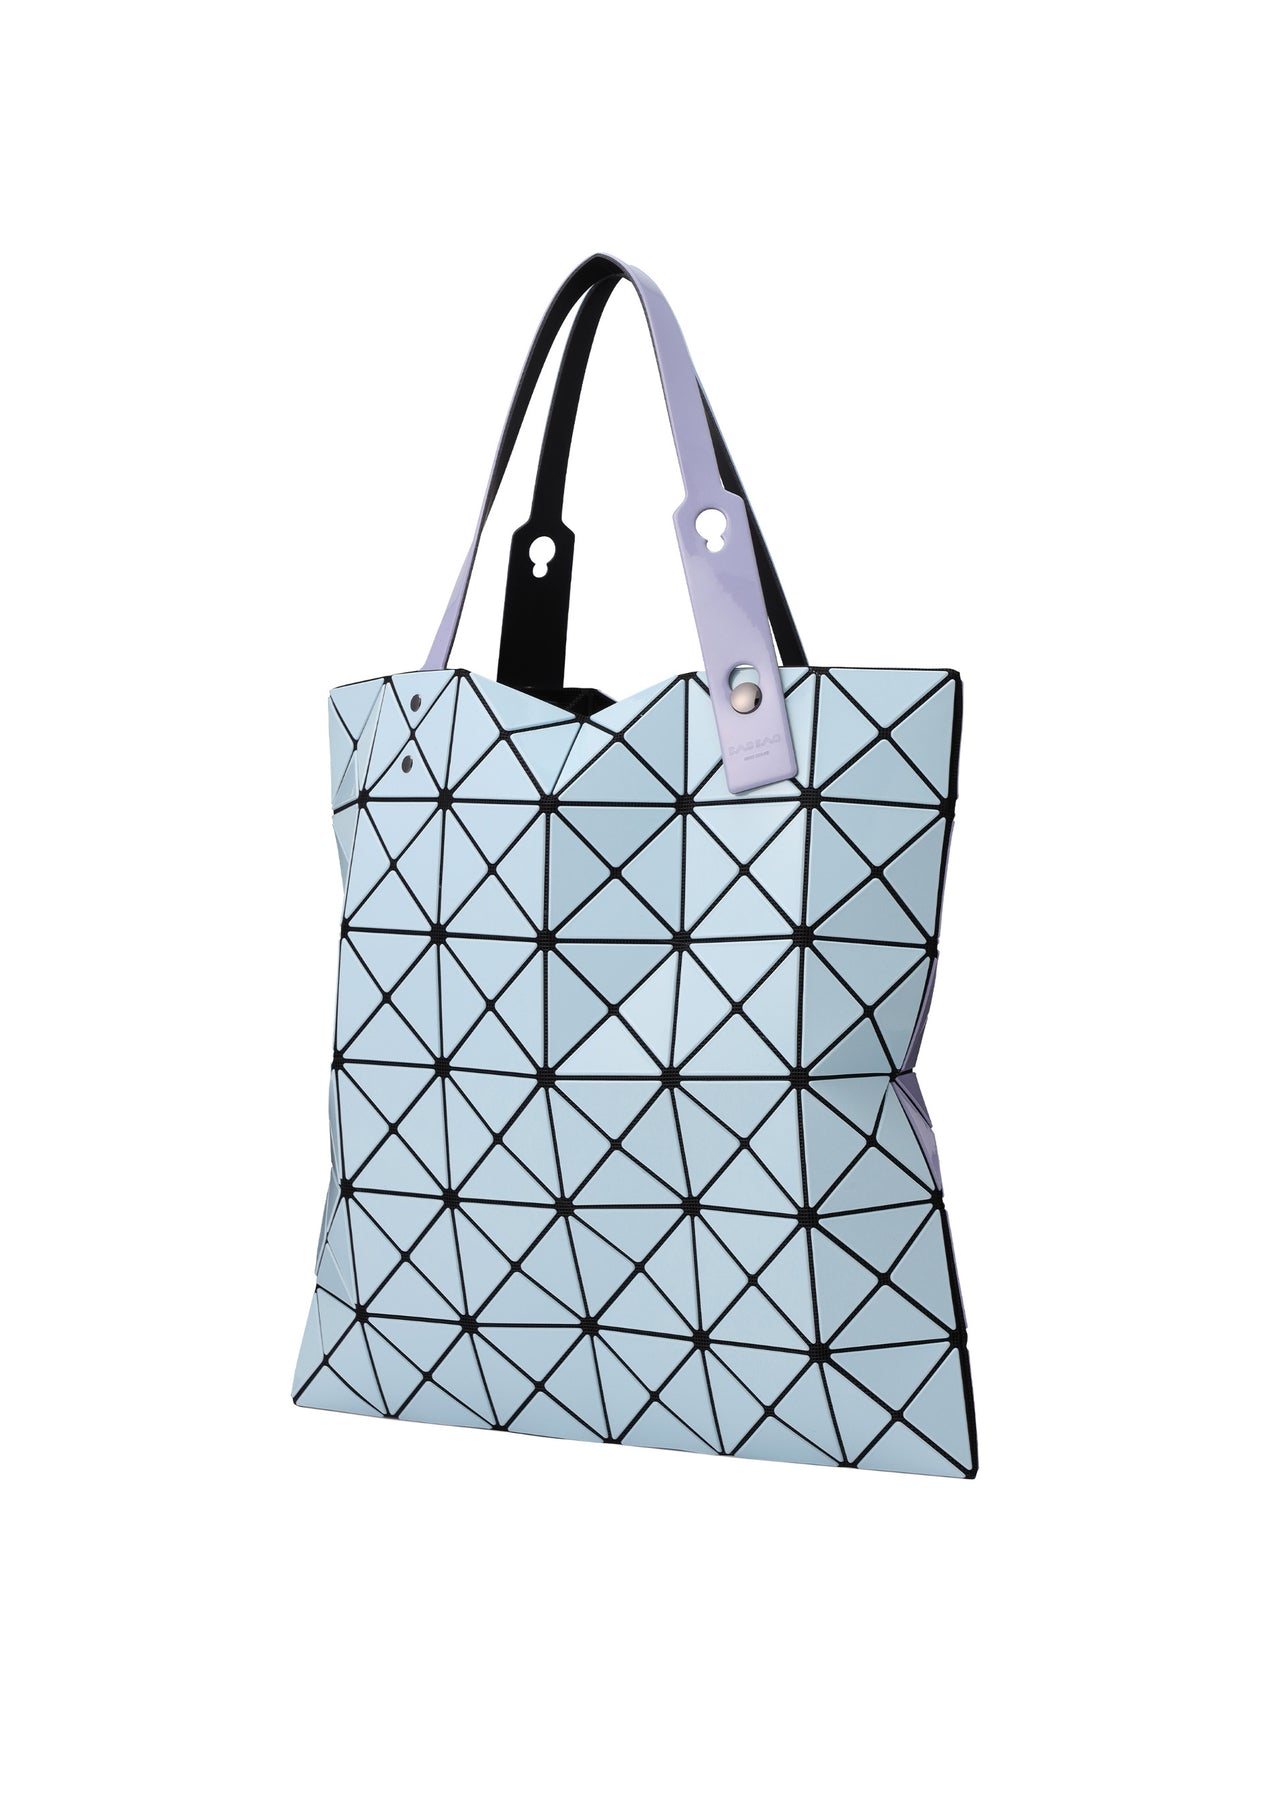 Brighten Your Days With The Bao Bao Issey Miyake Lucent Gloss Tote